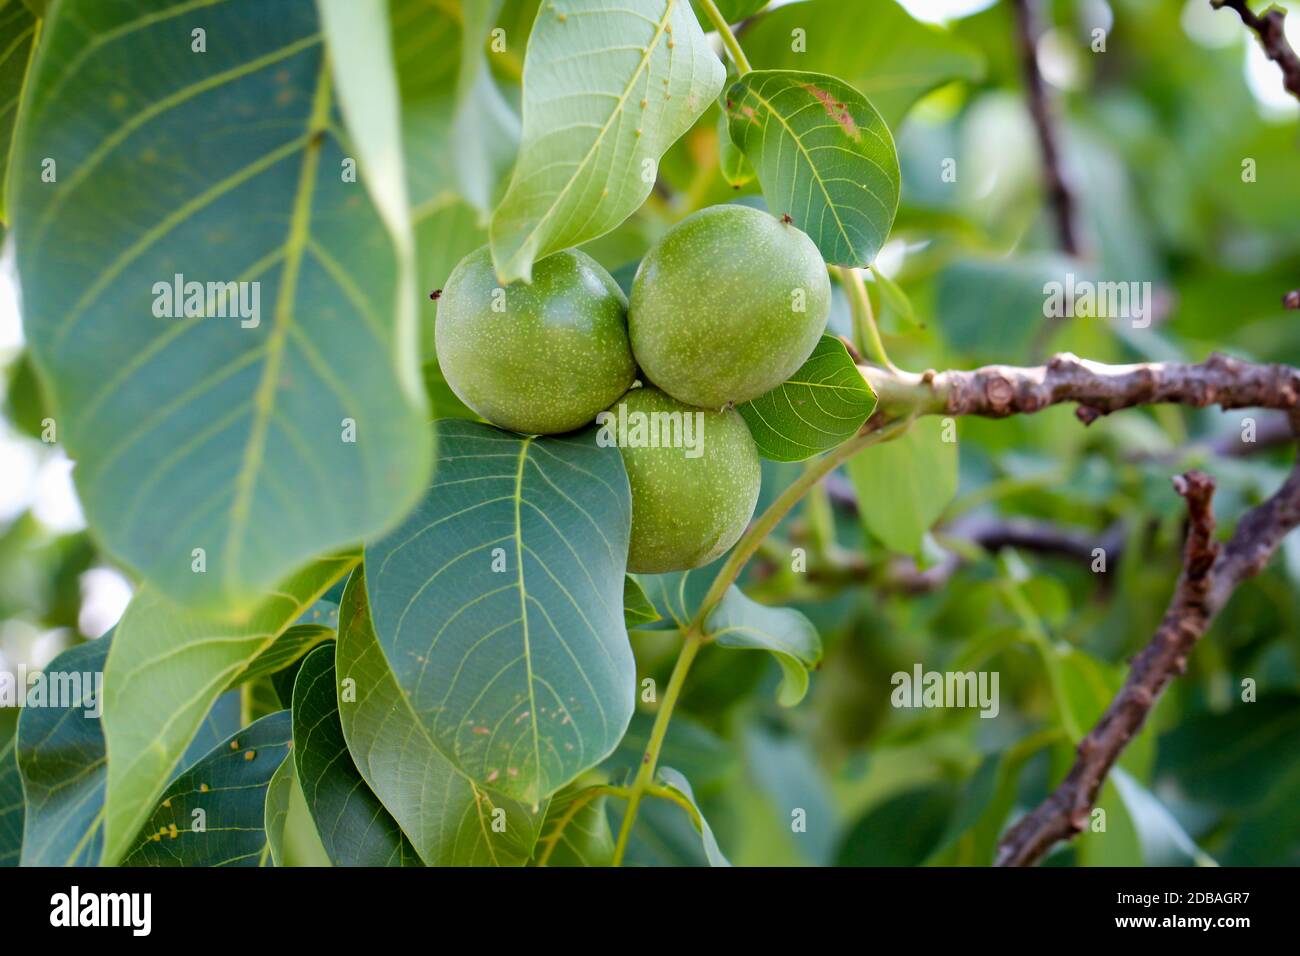 Three walnuts in their green coating hanging on the tree. Stock Photo